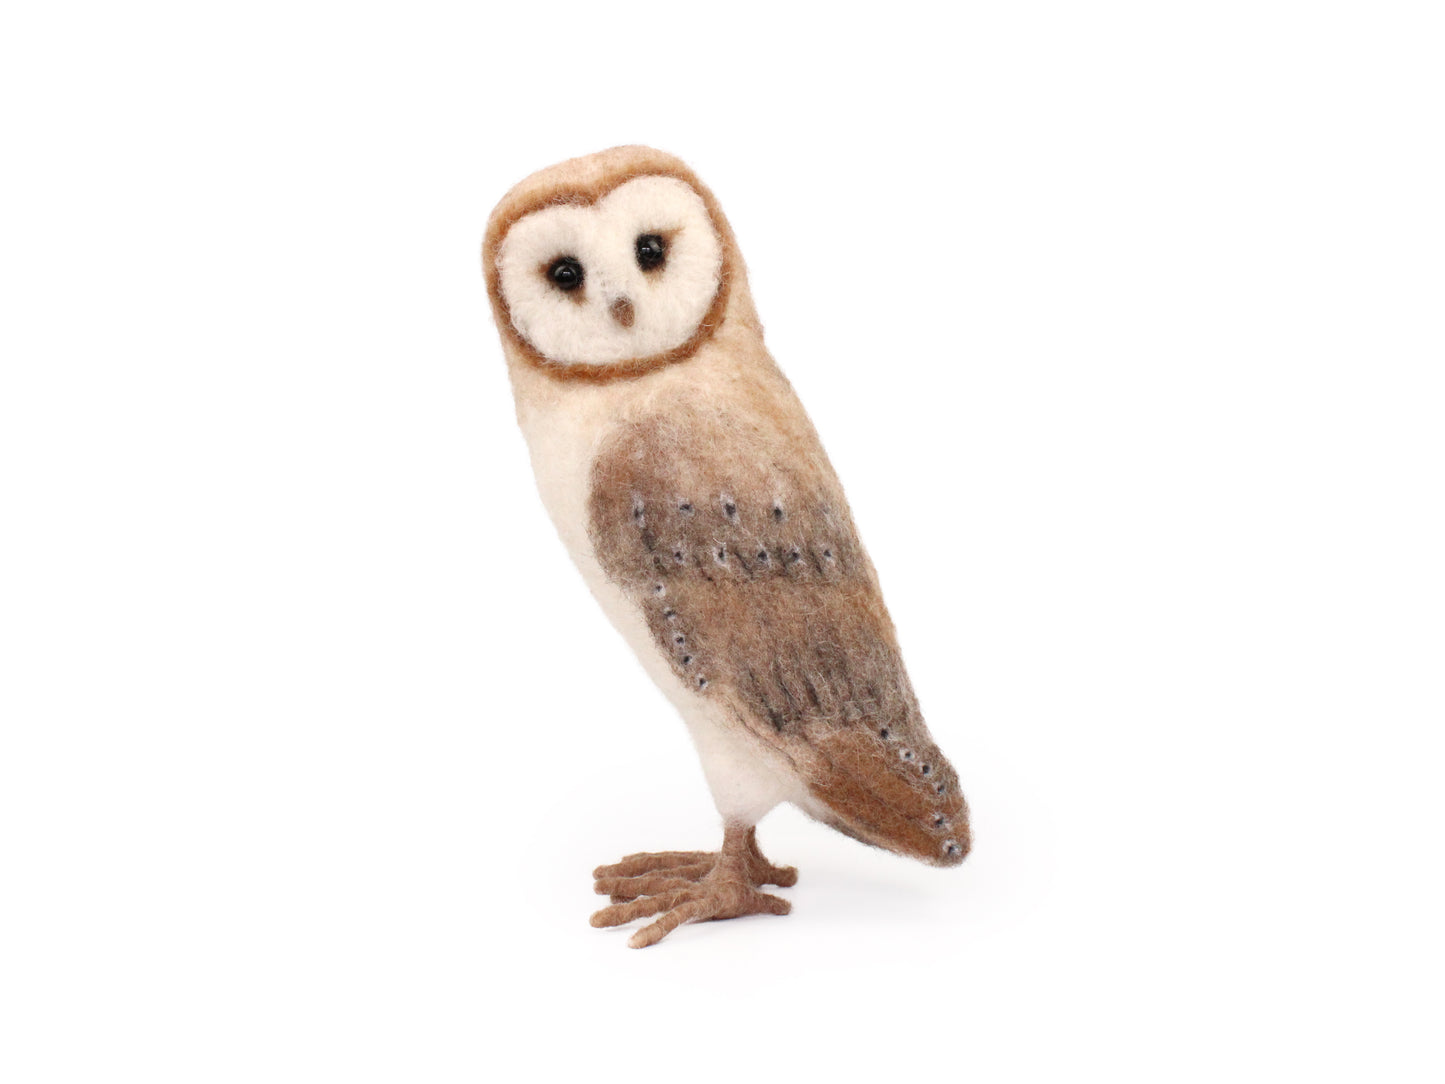 New and Improved + more core wool - Large Barn Owl Needle Felt Pack- with or without tools - The Makerss